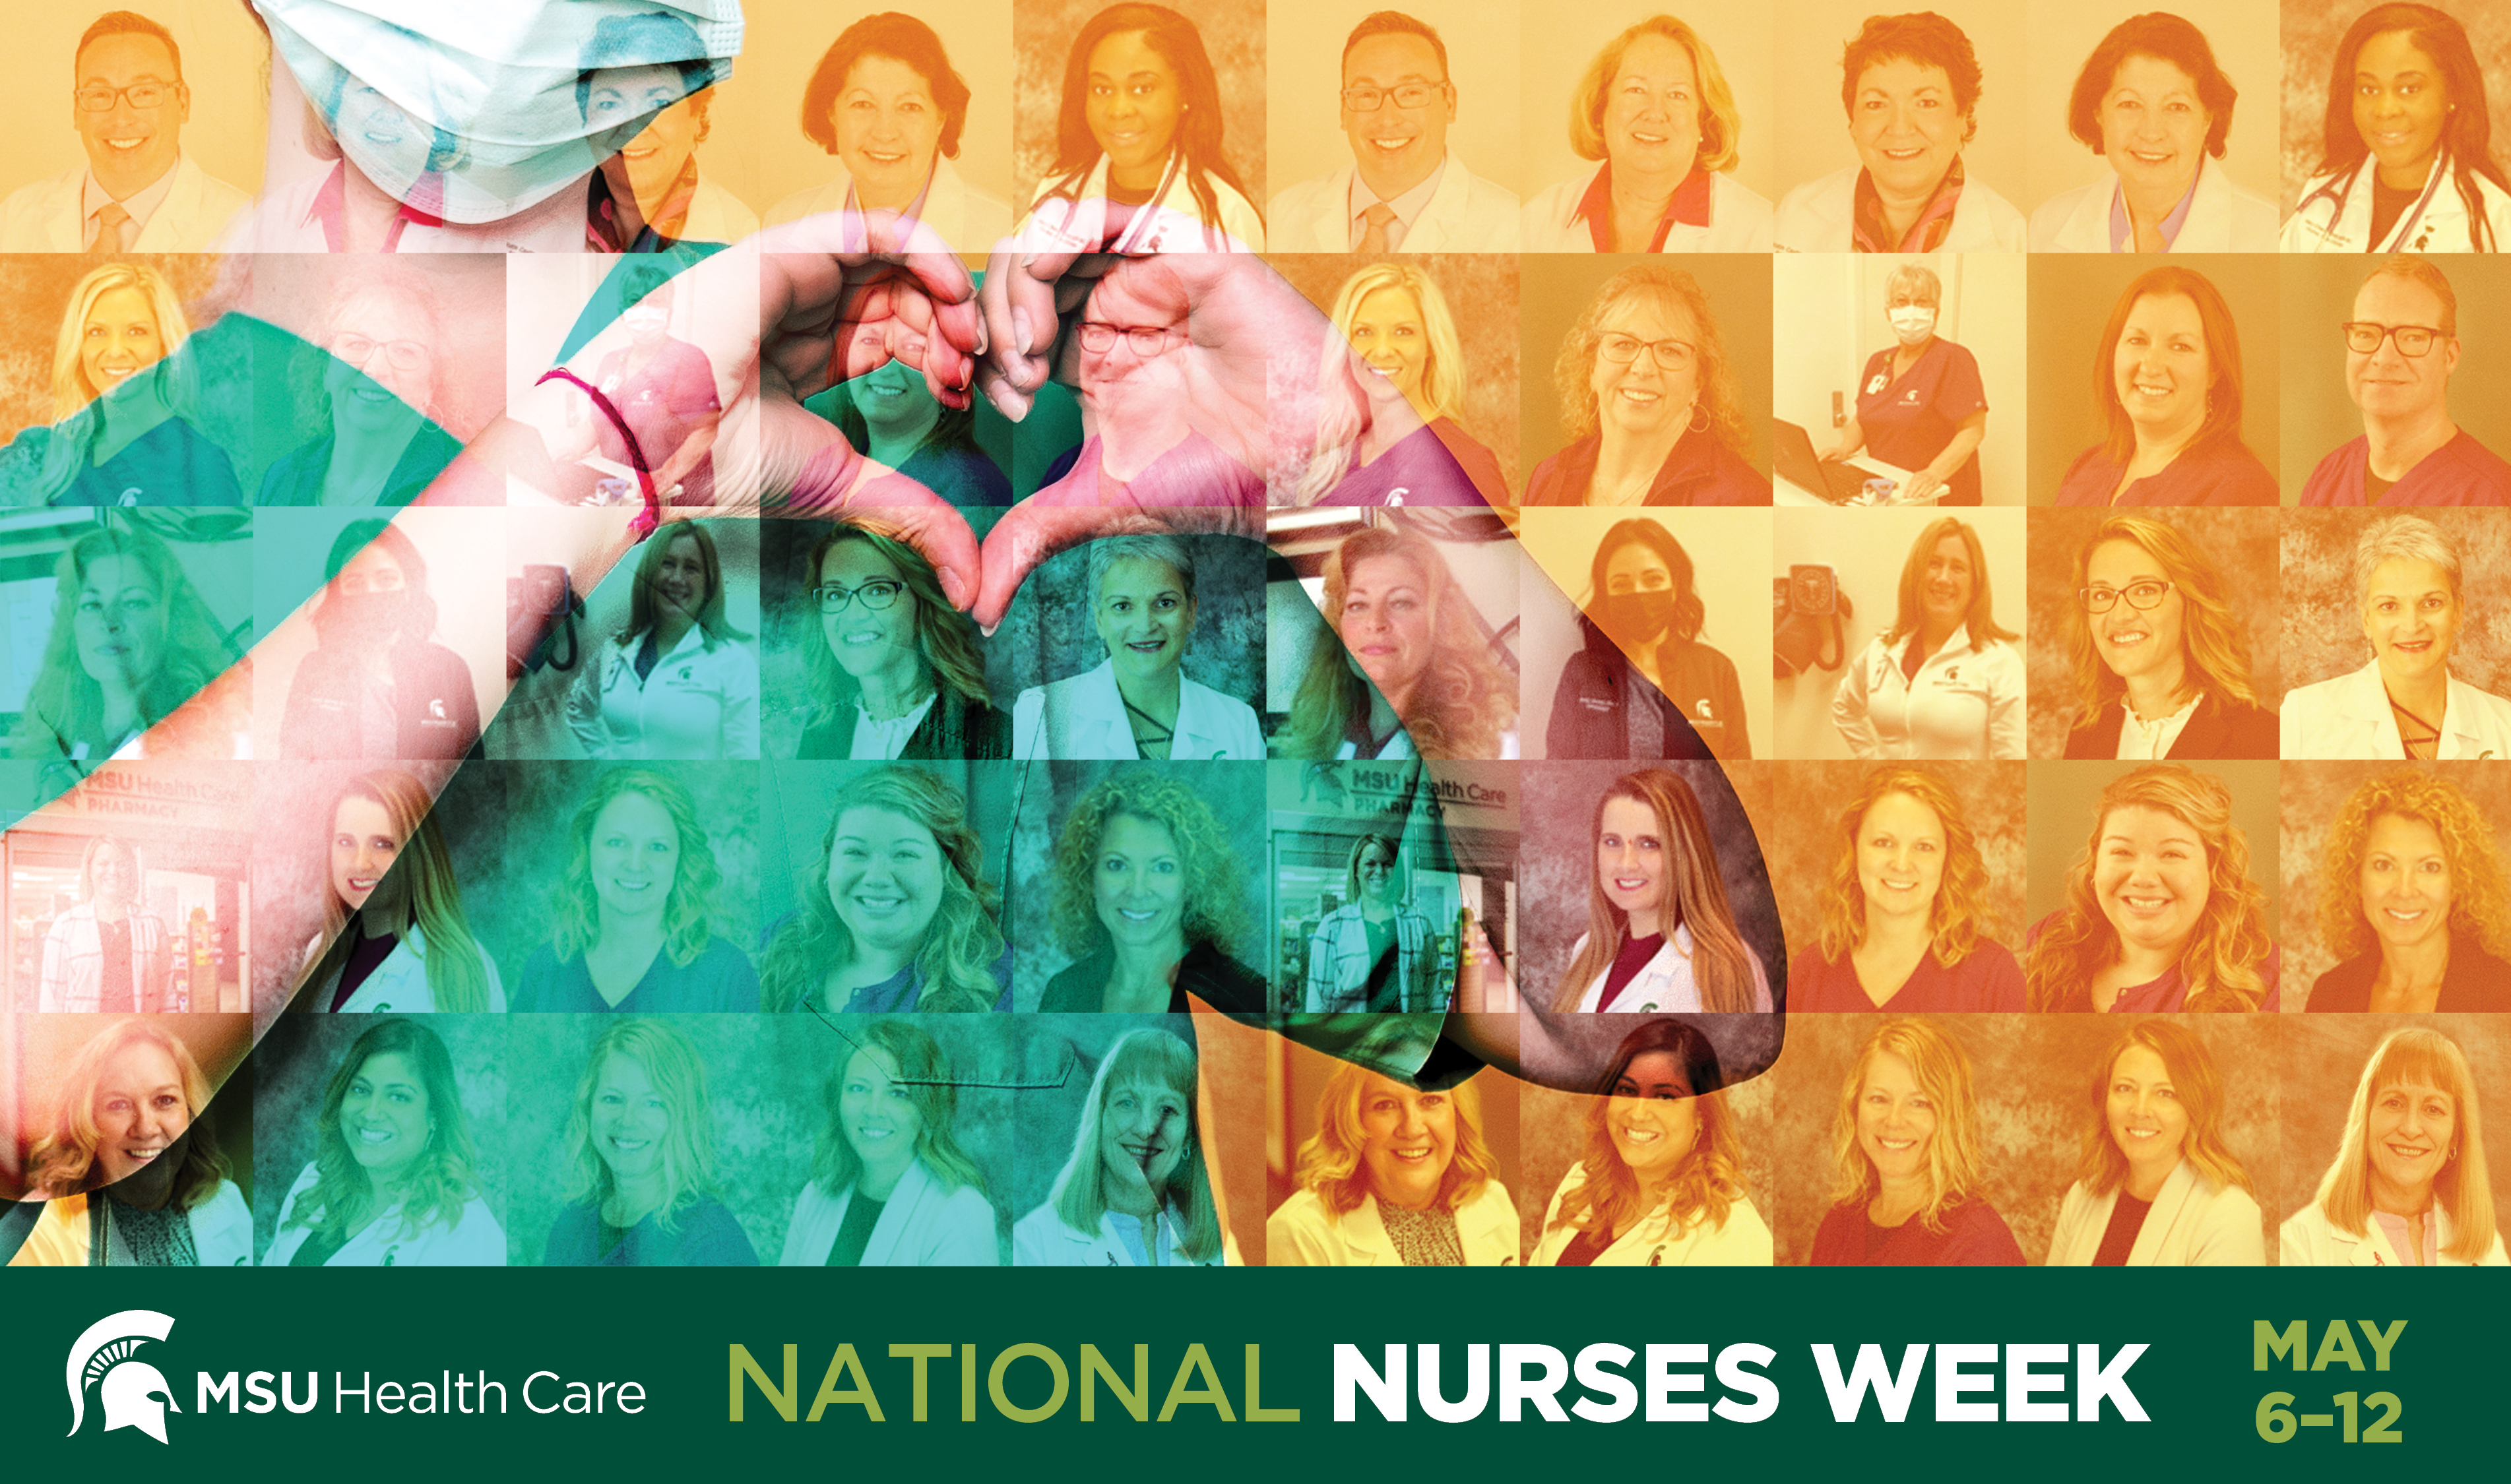 Cultivating Community: MSU Health Care Nurses Reflect on the Importance of Community During Nurses Week